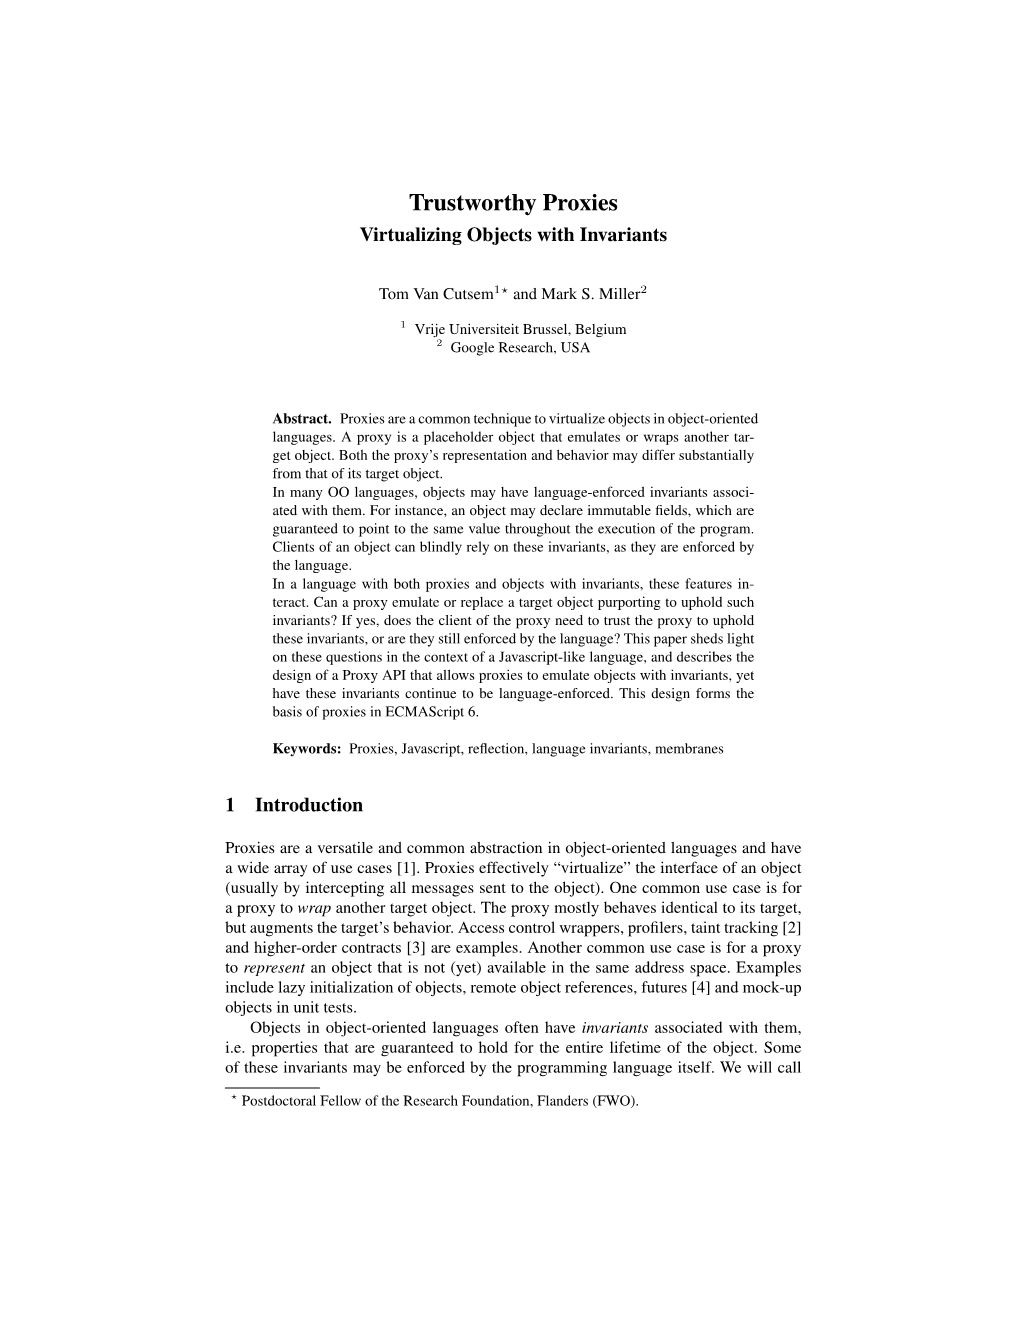 Trustworthy Proxies Virtualizing Objects with Invariants